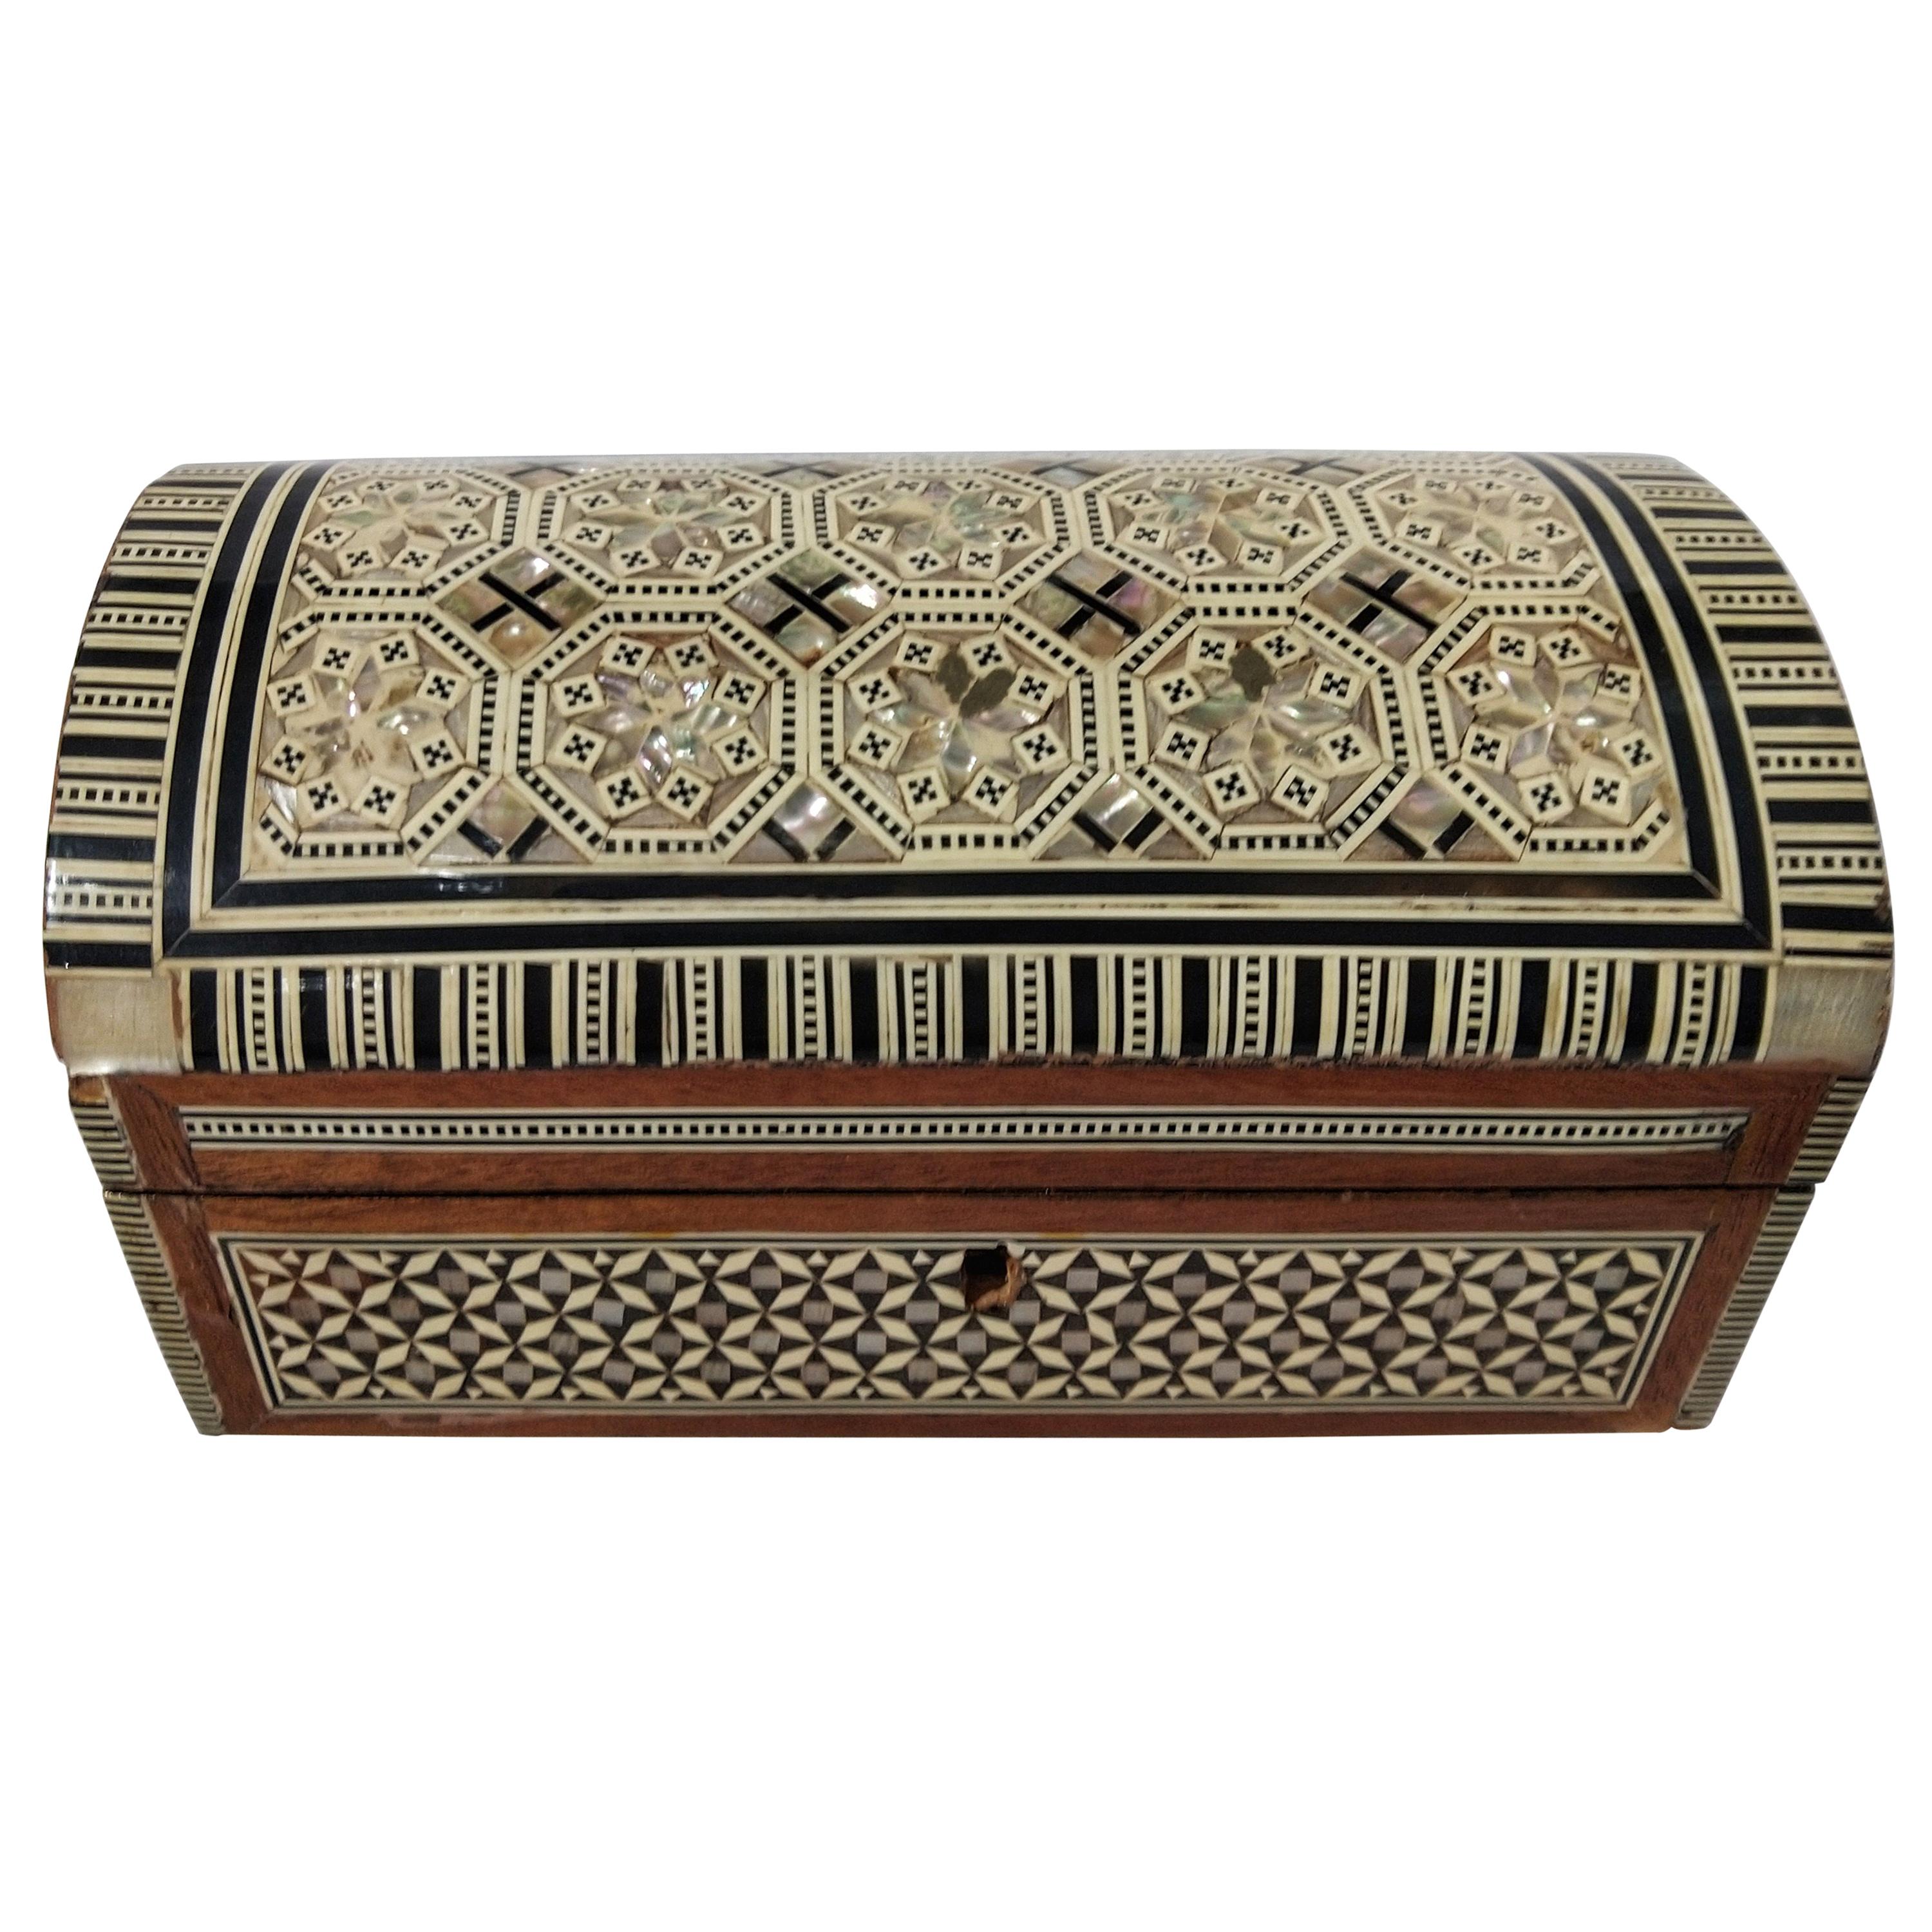 20th Century Syrian Nacre Mother of Pearl and Wood Inlaid Jewelry Box